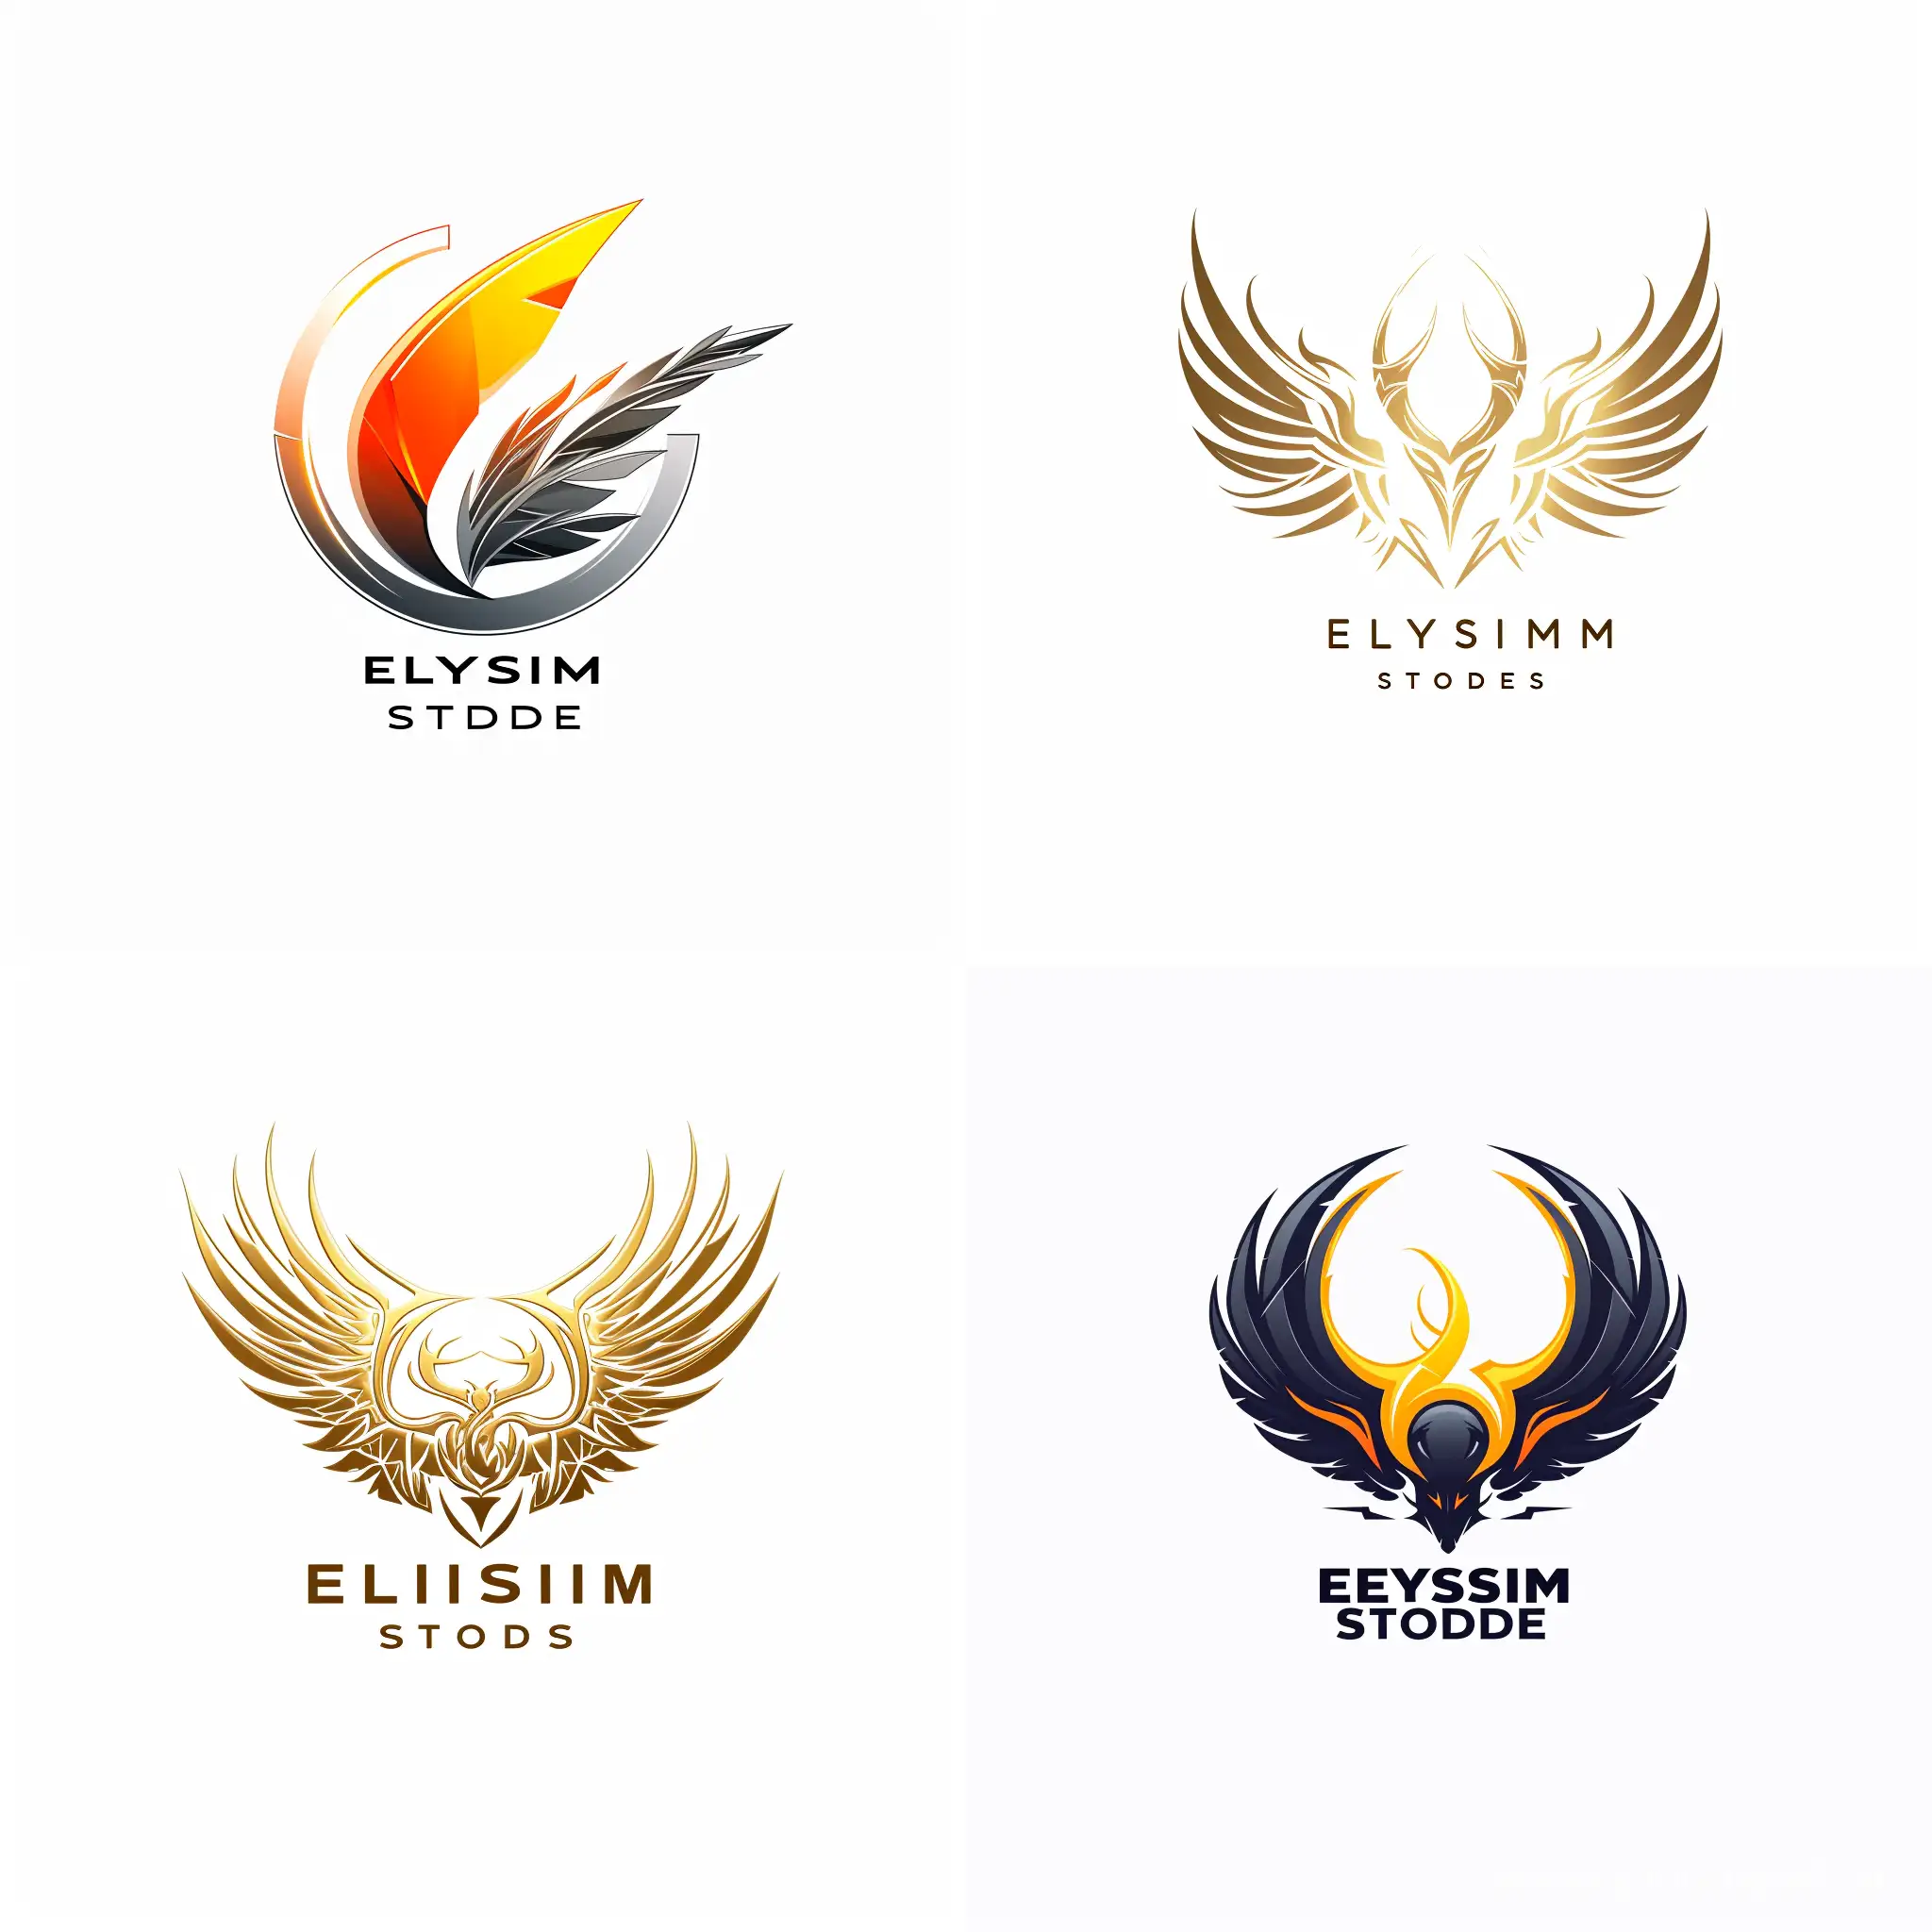 make me a logo for a marketing design company called elysium Studios with a white background be extremely creative about it